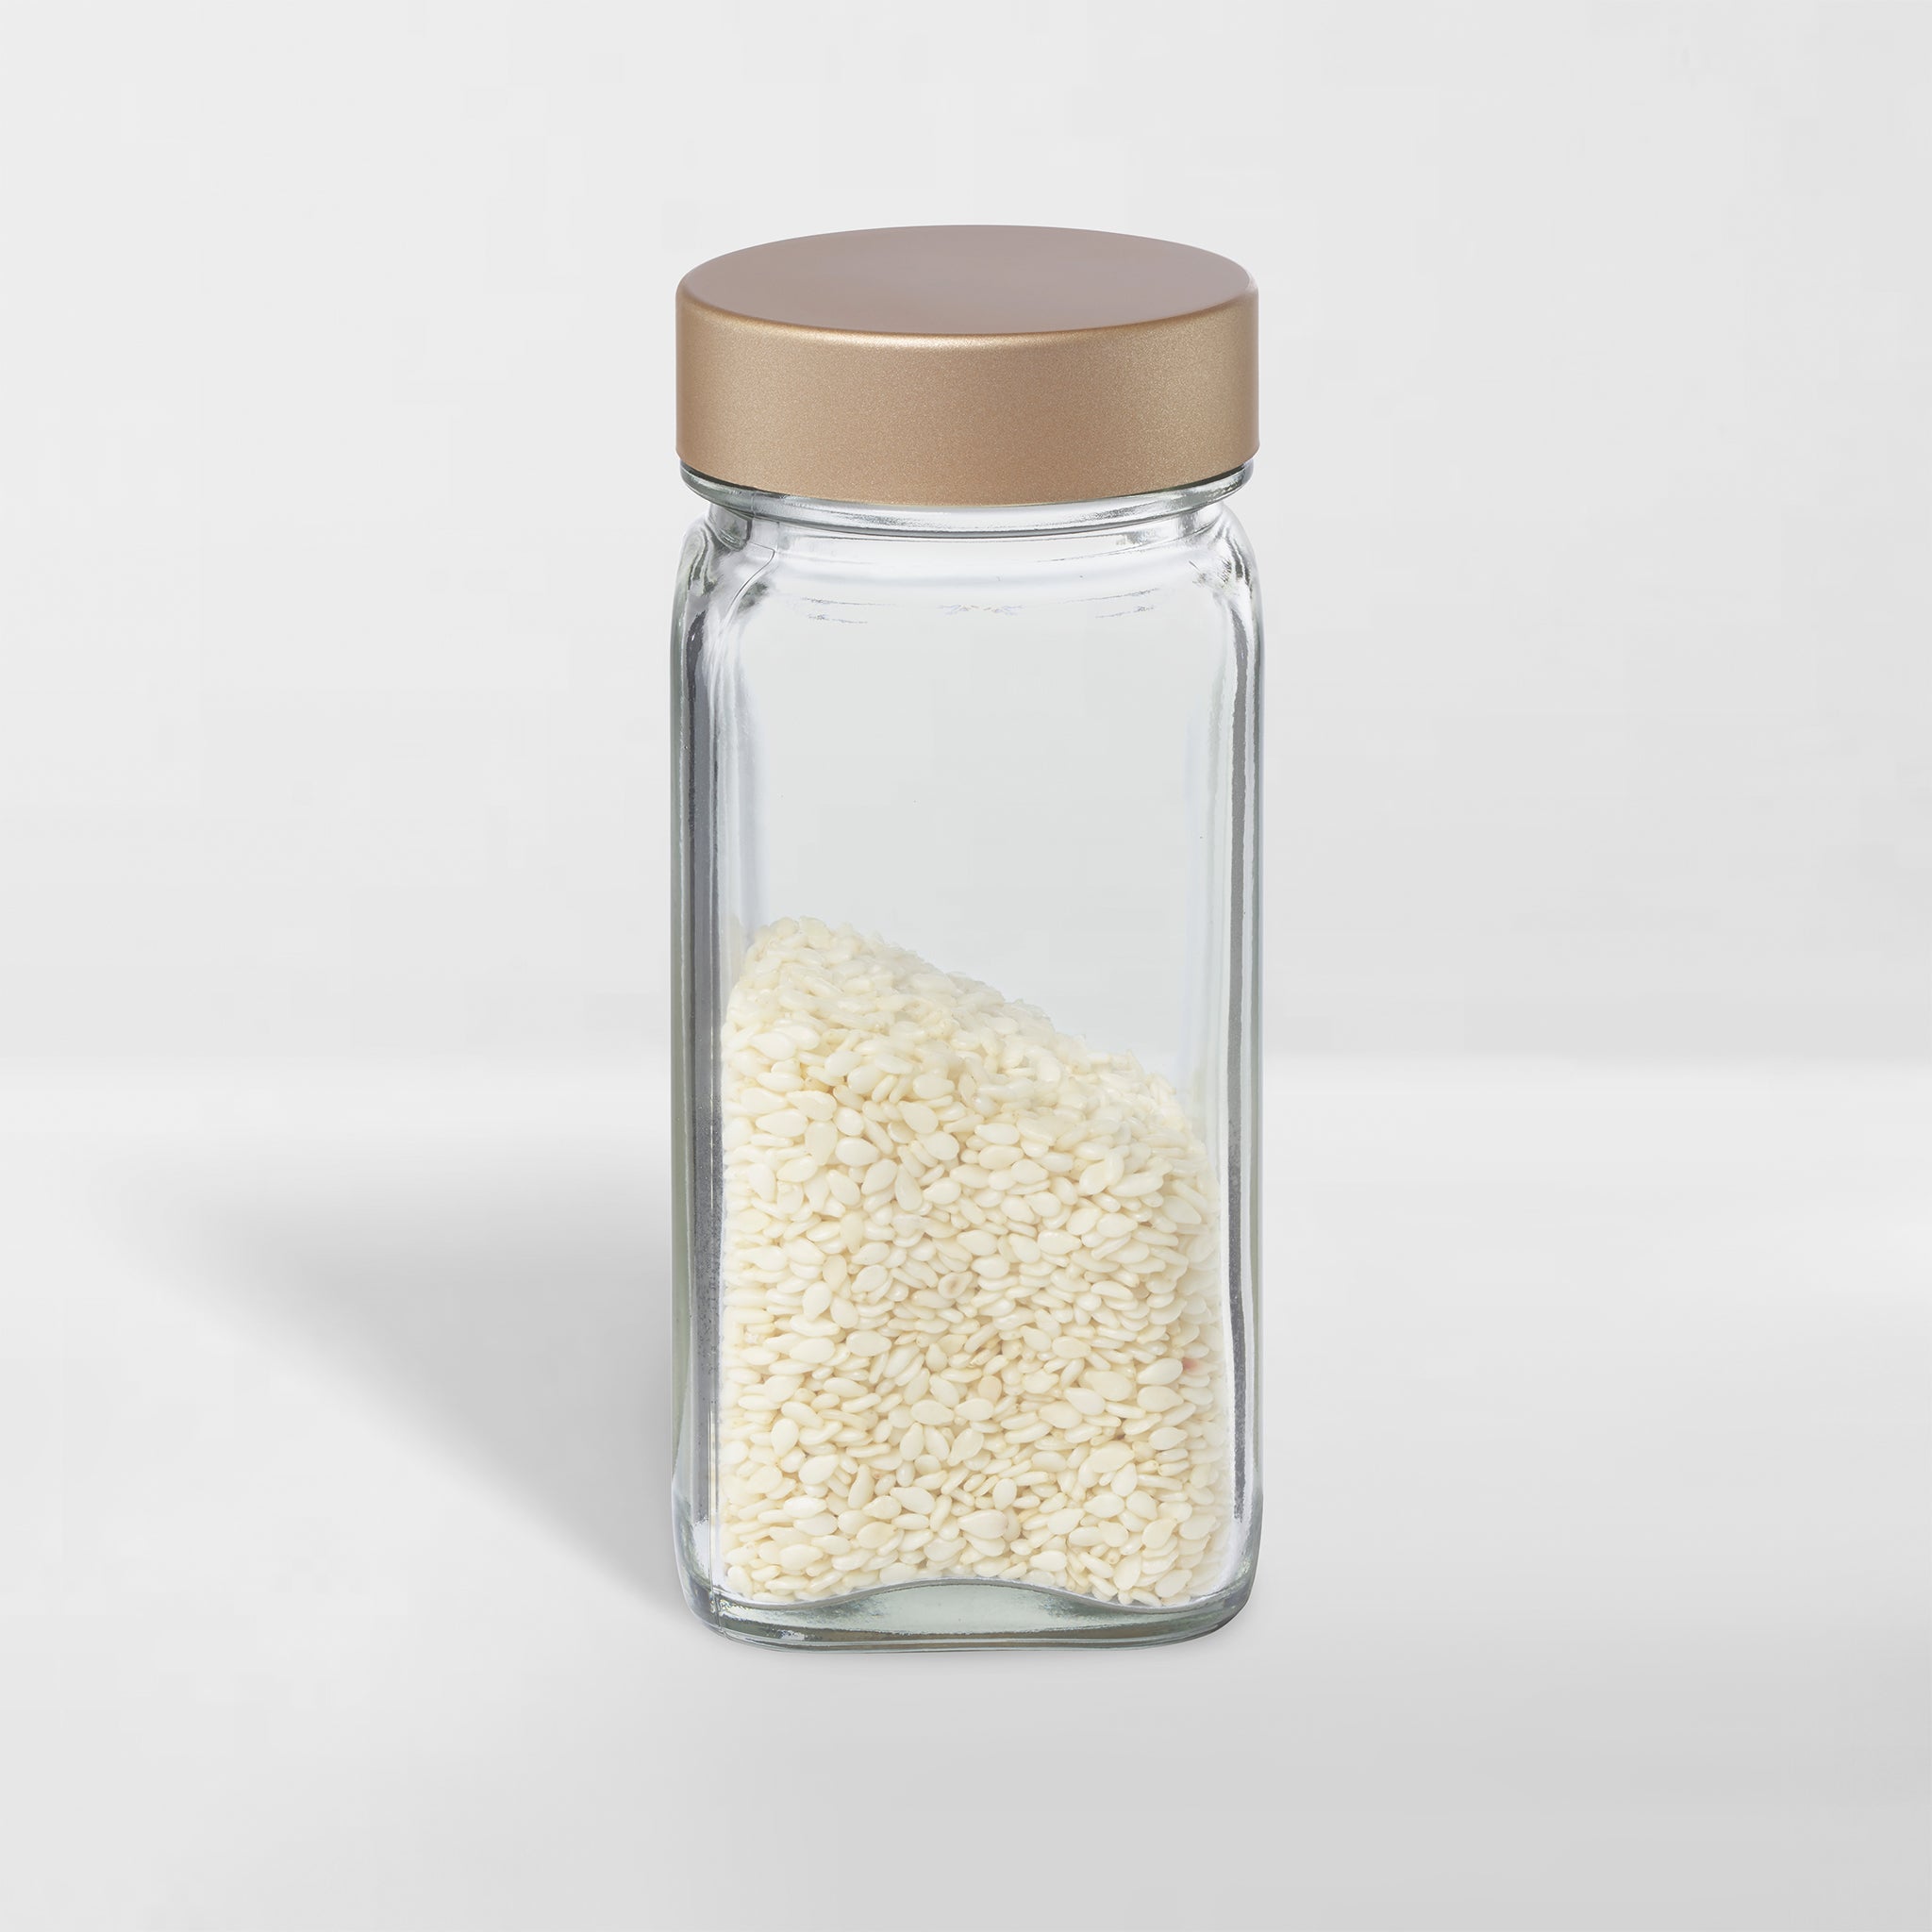 The Container Store Glass Spice Jar - Gold - 3 oz